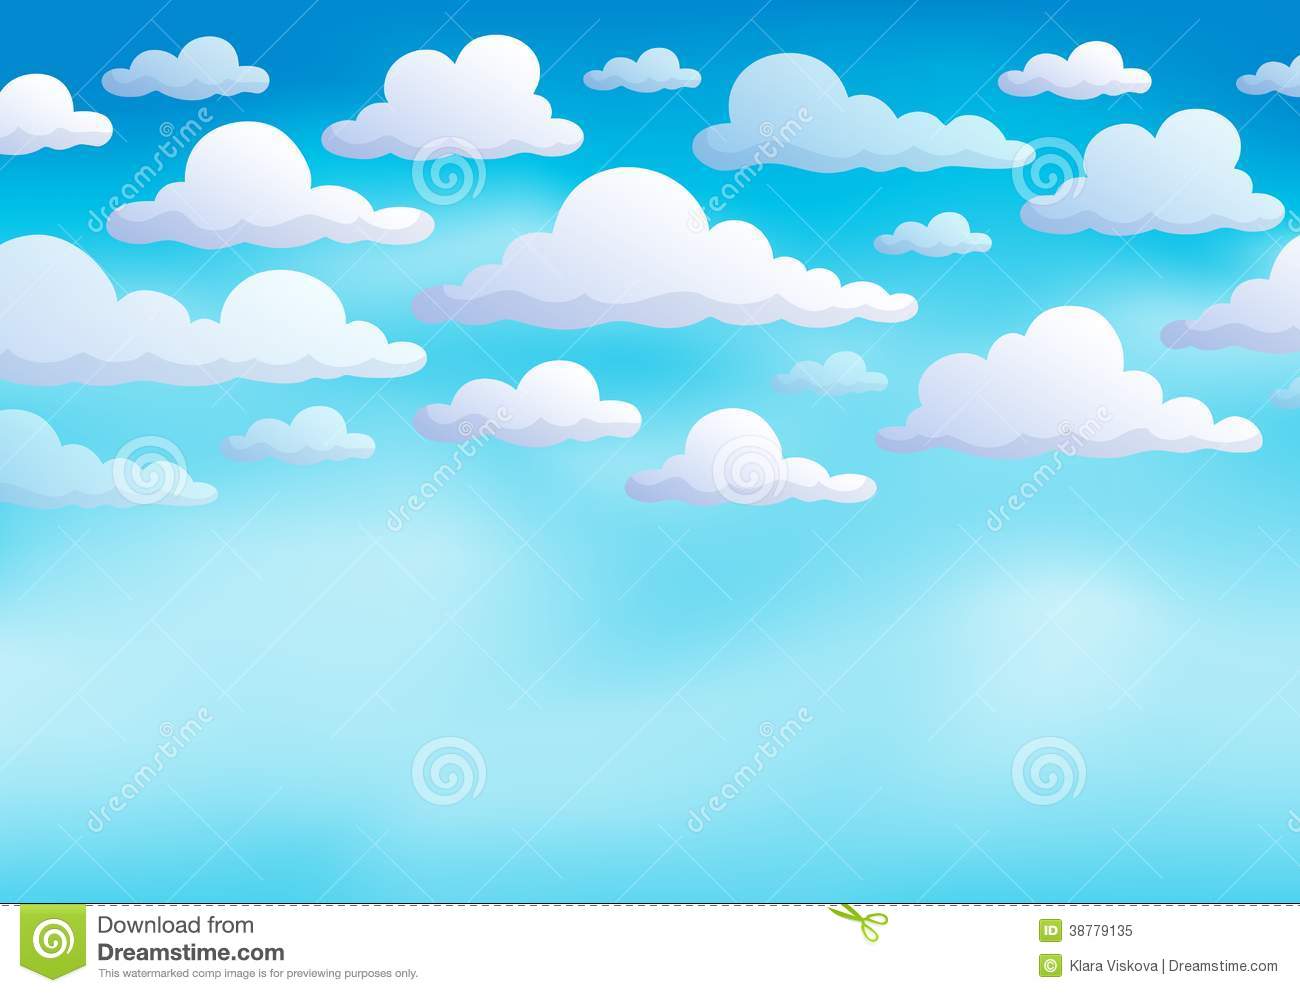 Sky background clipart 2 » Clipart Station.